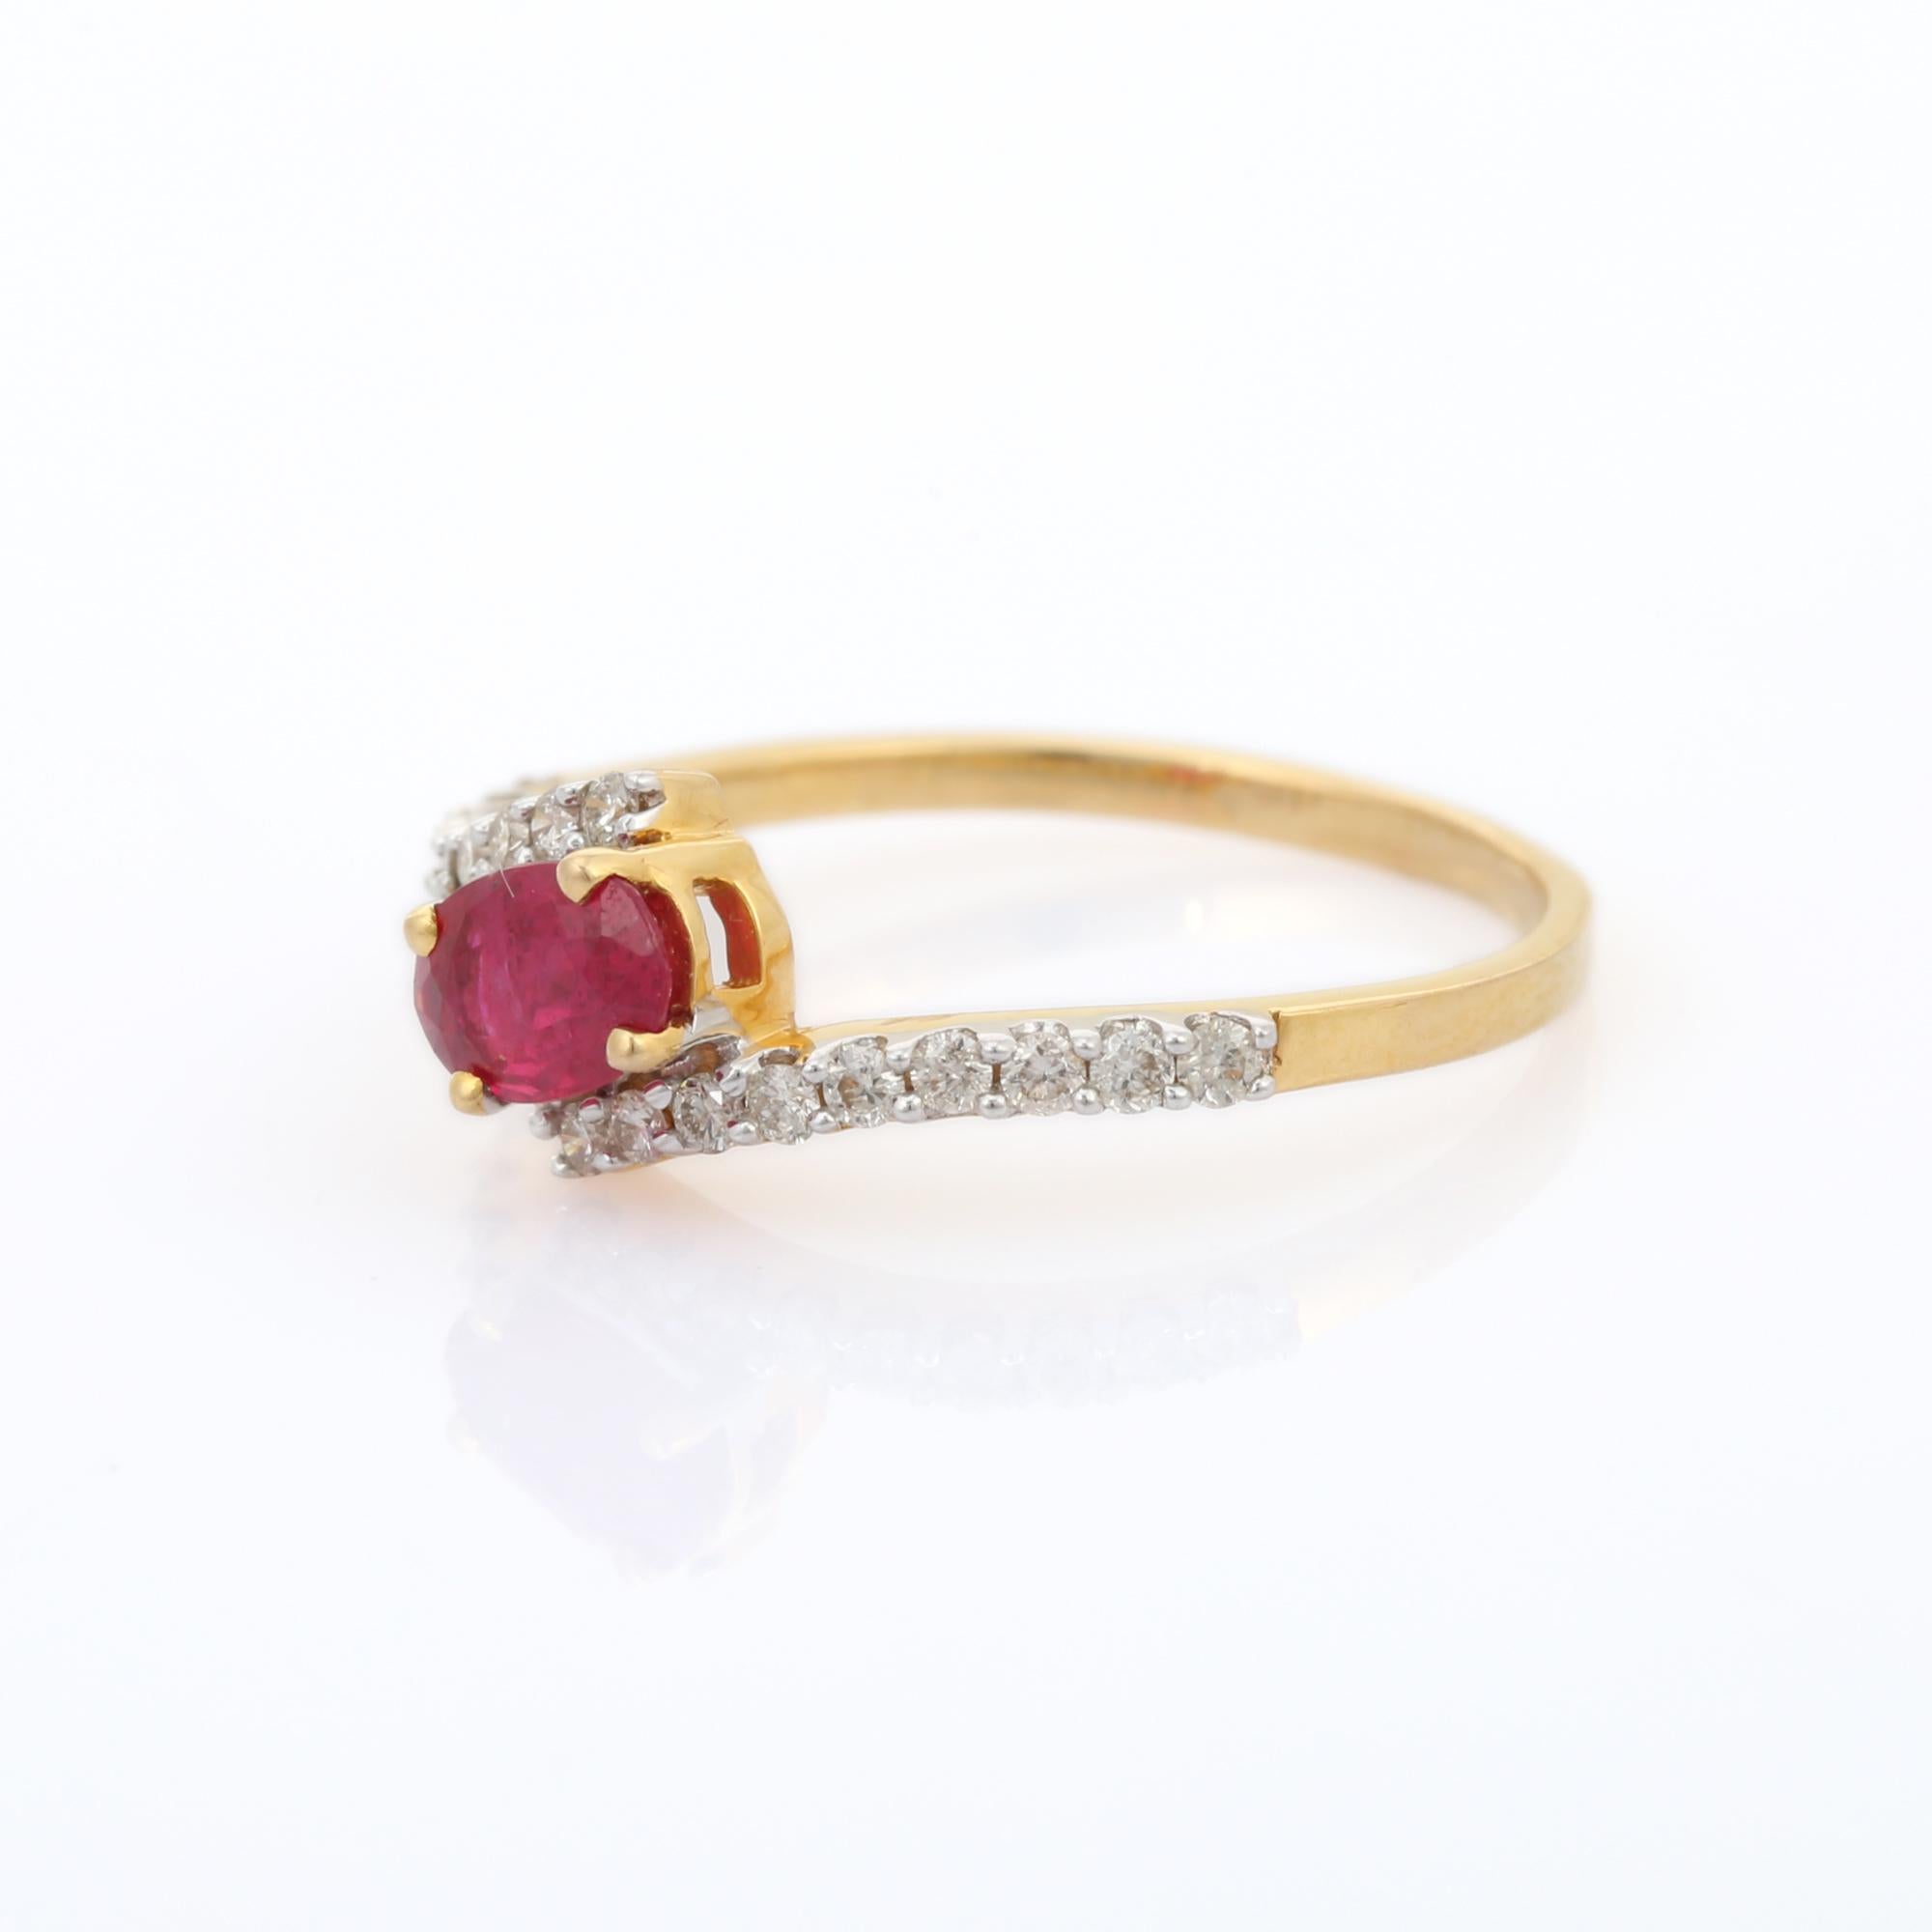 For Sale:  Designer Natural Diamond and Ruby Ring in Solid 18k Yellow Gold 4